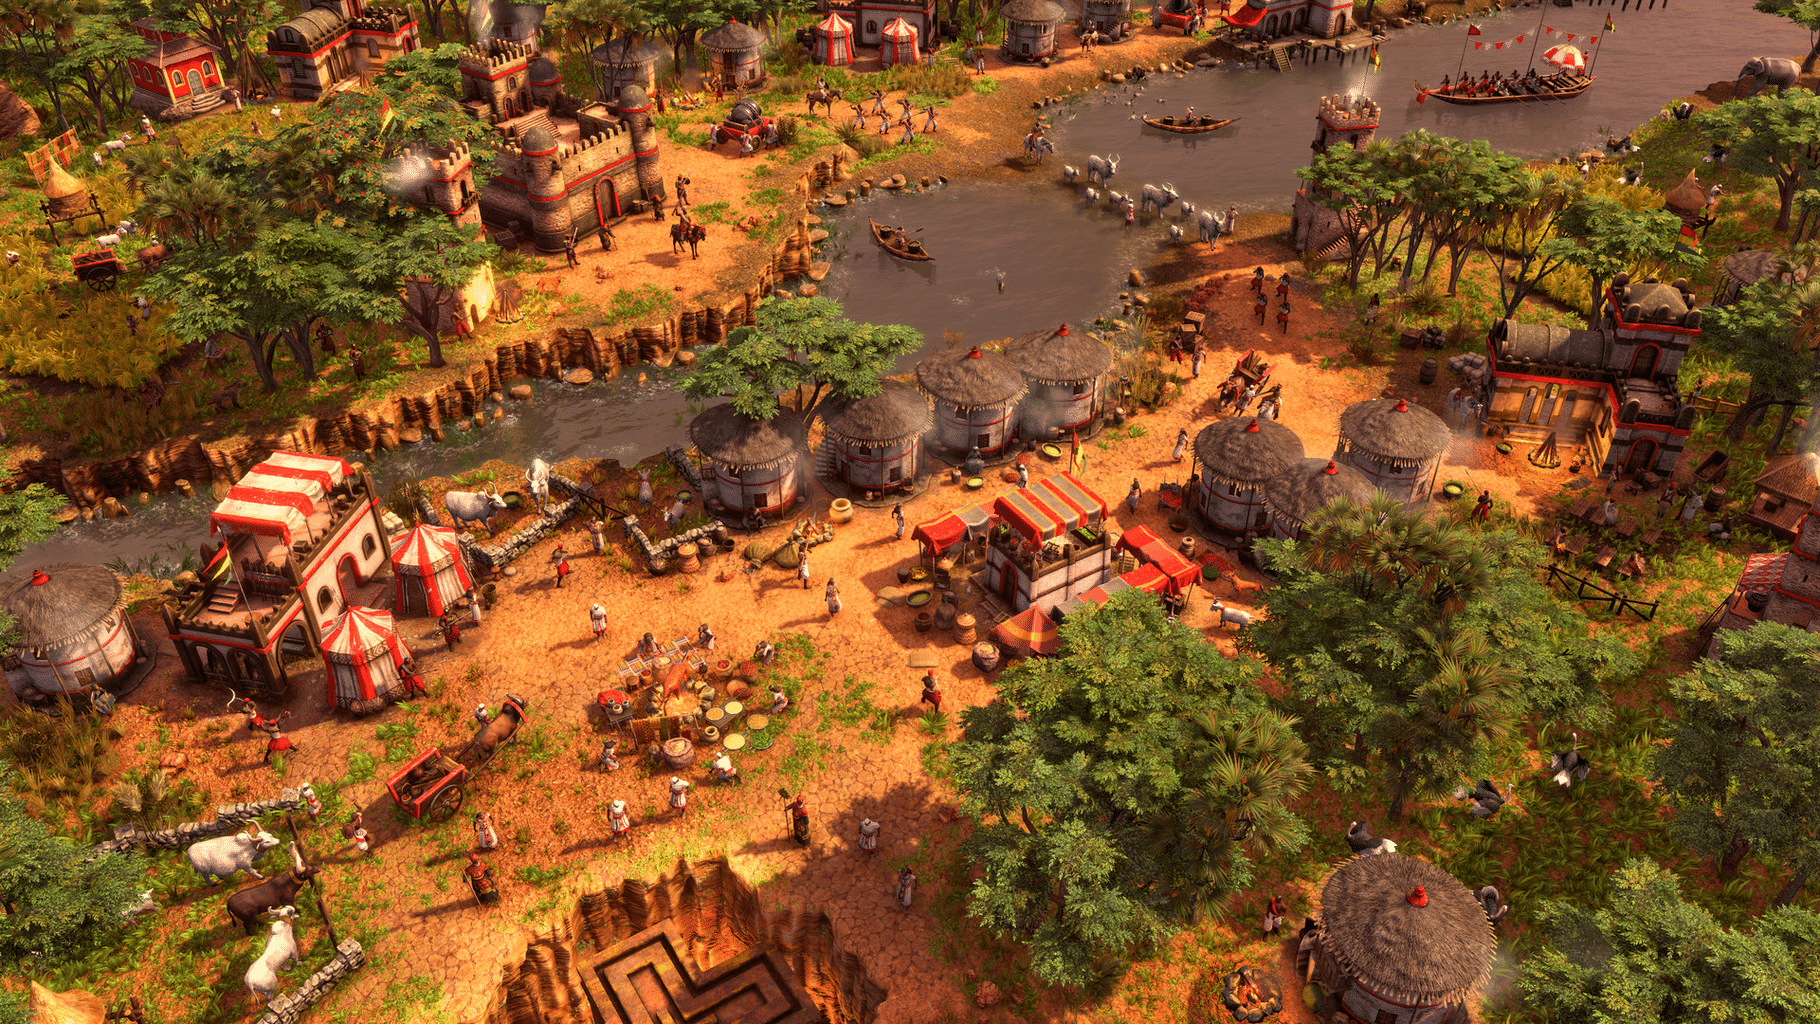 Age of Empires III: Definitive Edition - The African Royals screenshot